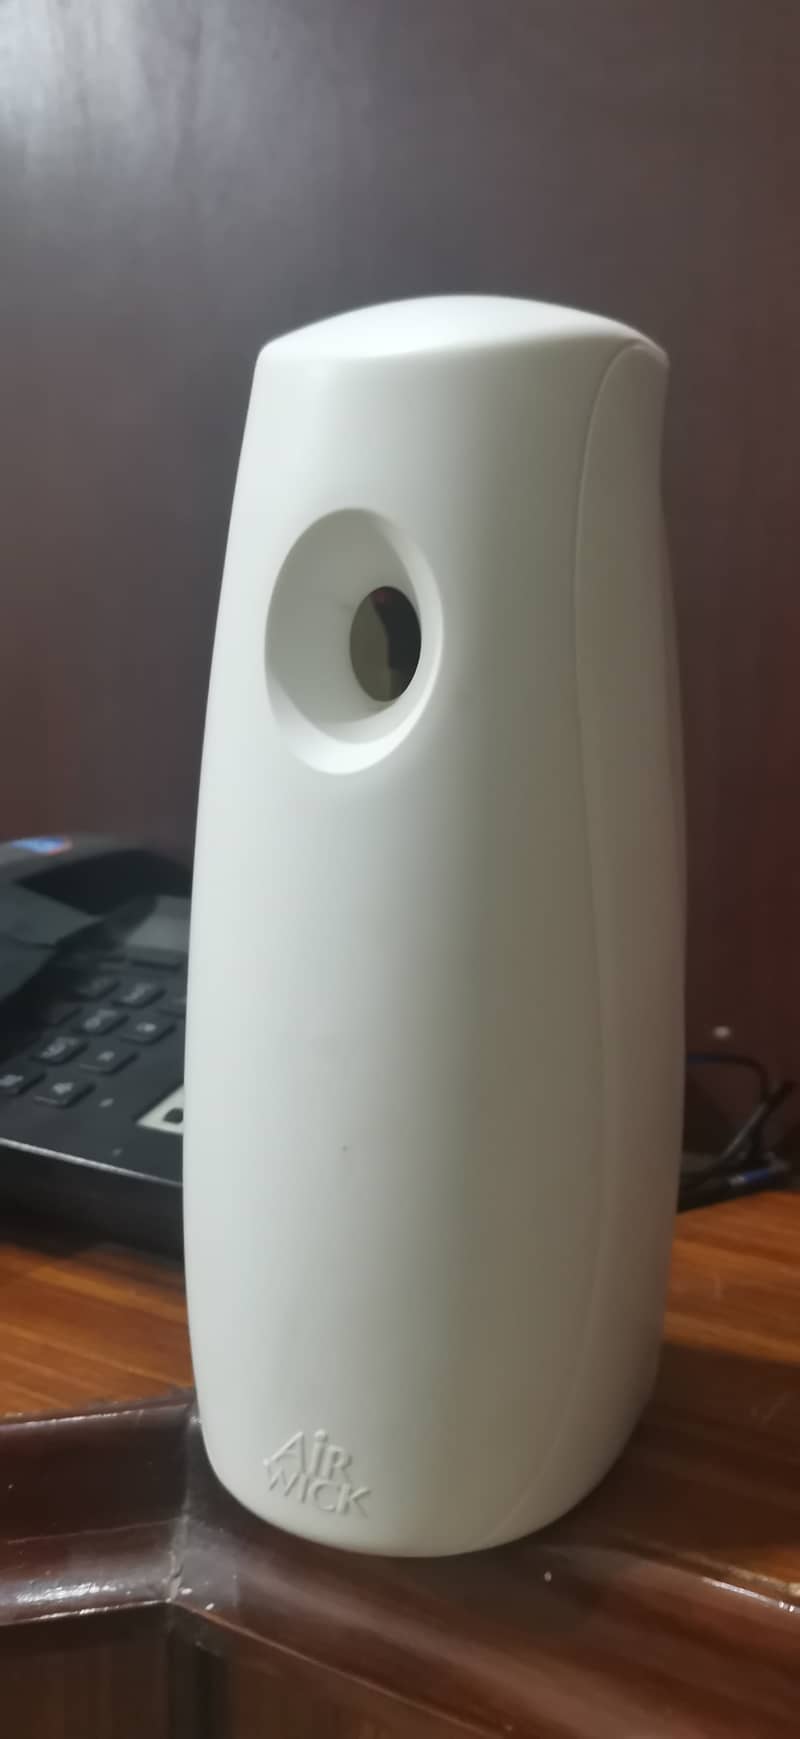 AirWick Freshmatic Automatic Spray Home Fragrance bought from Dubai 0